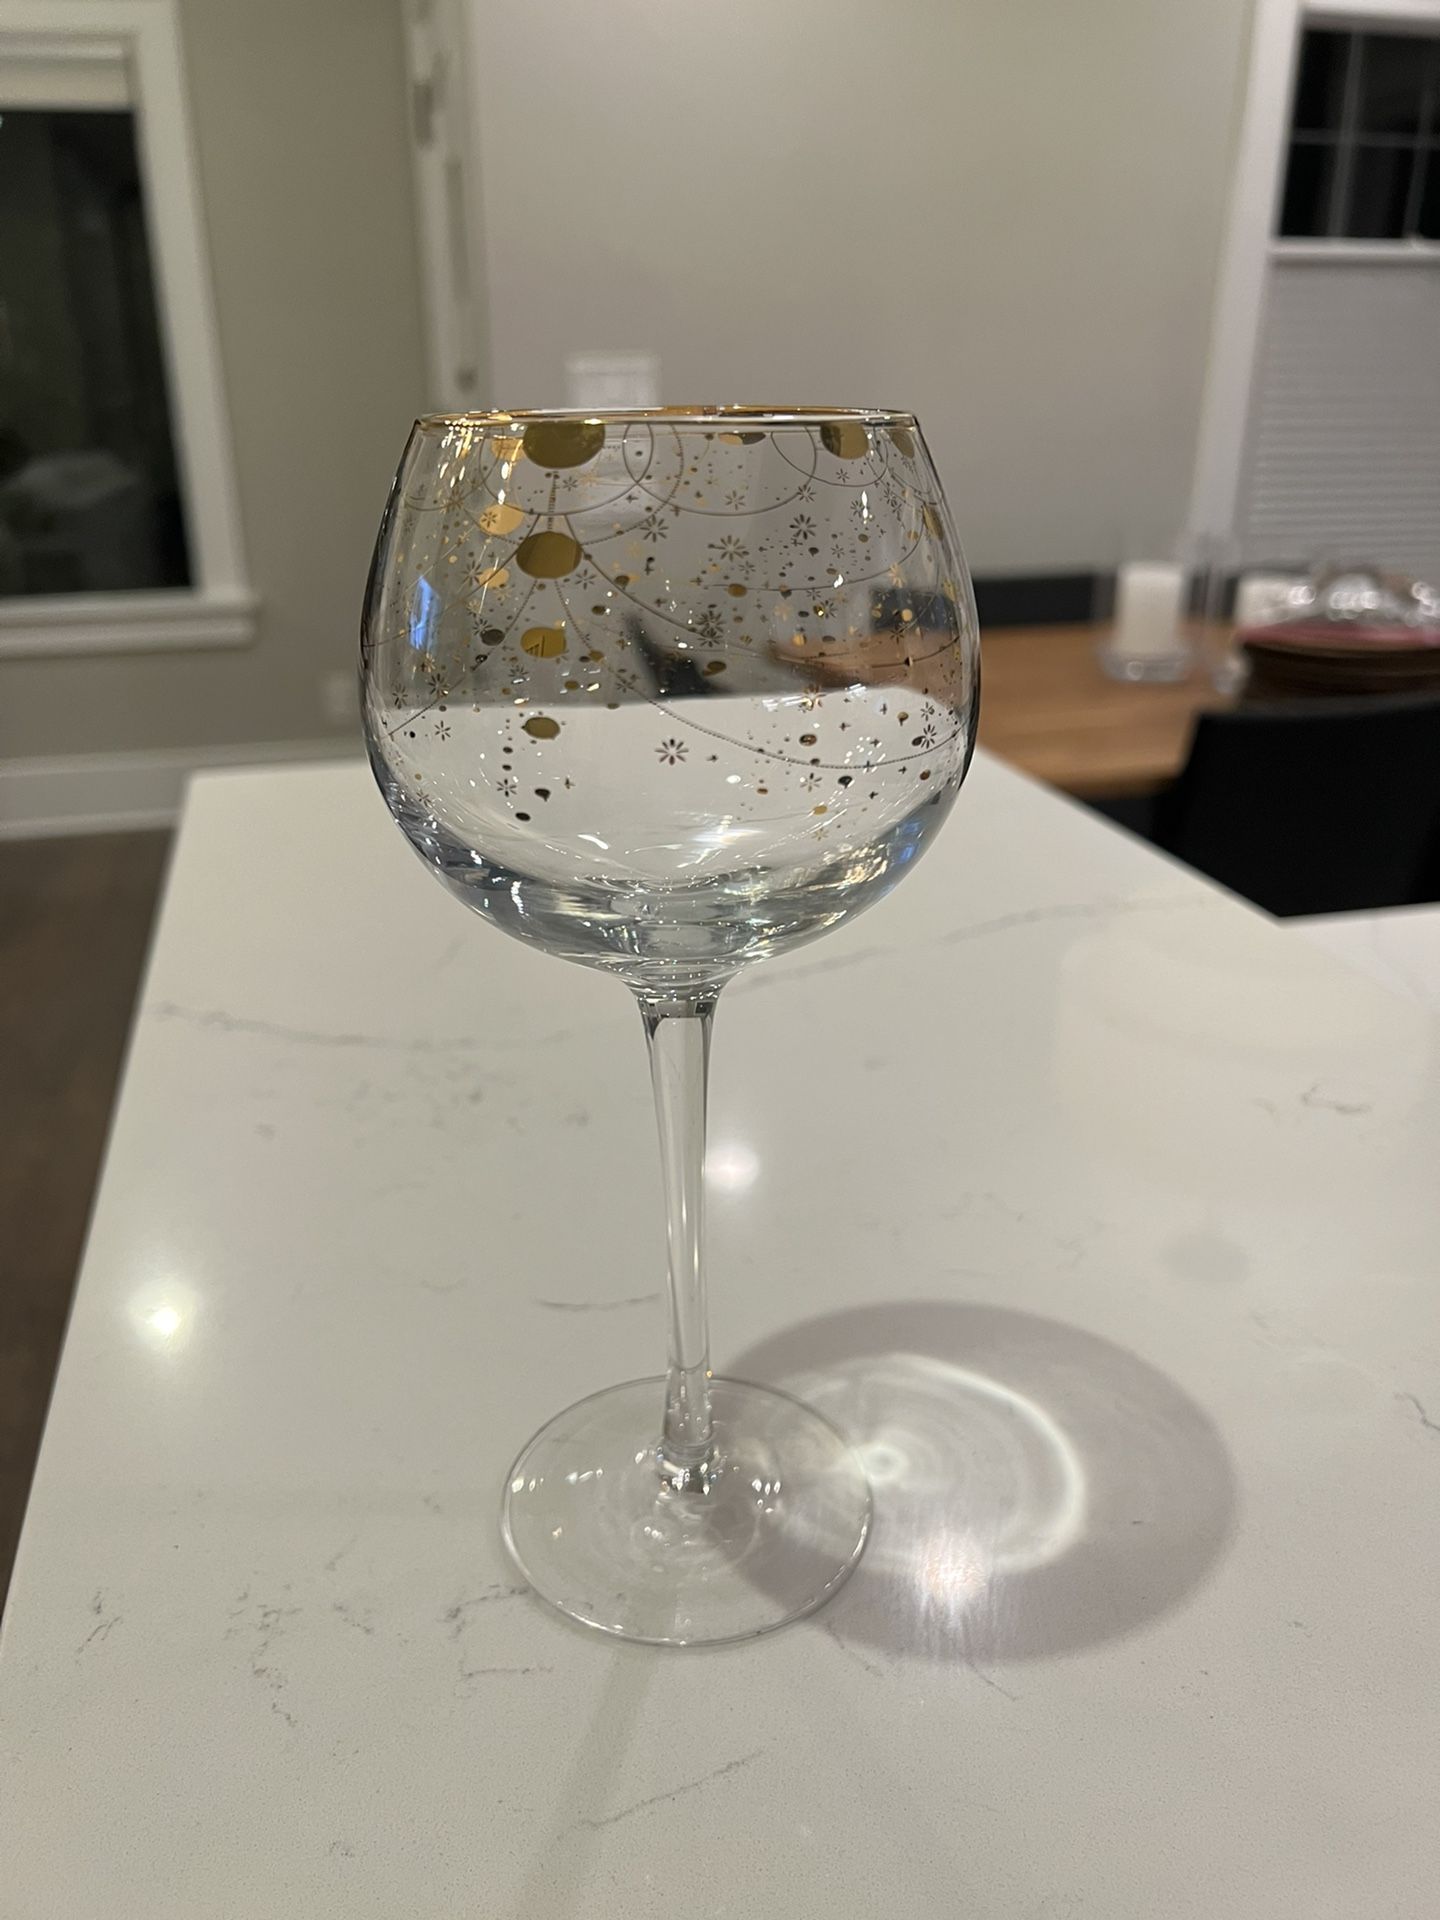 Anthropologie Wine Glasses With Gold Accents - Set Of 8